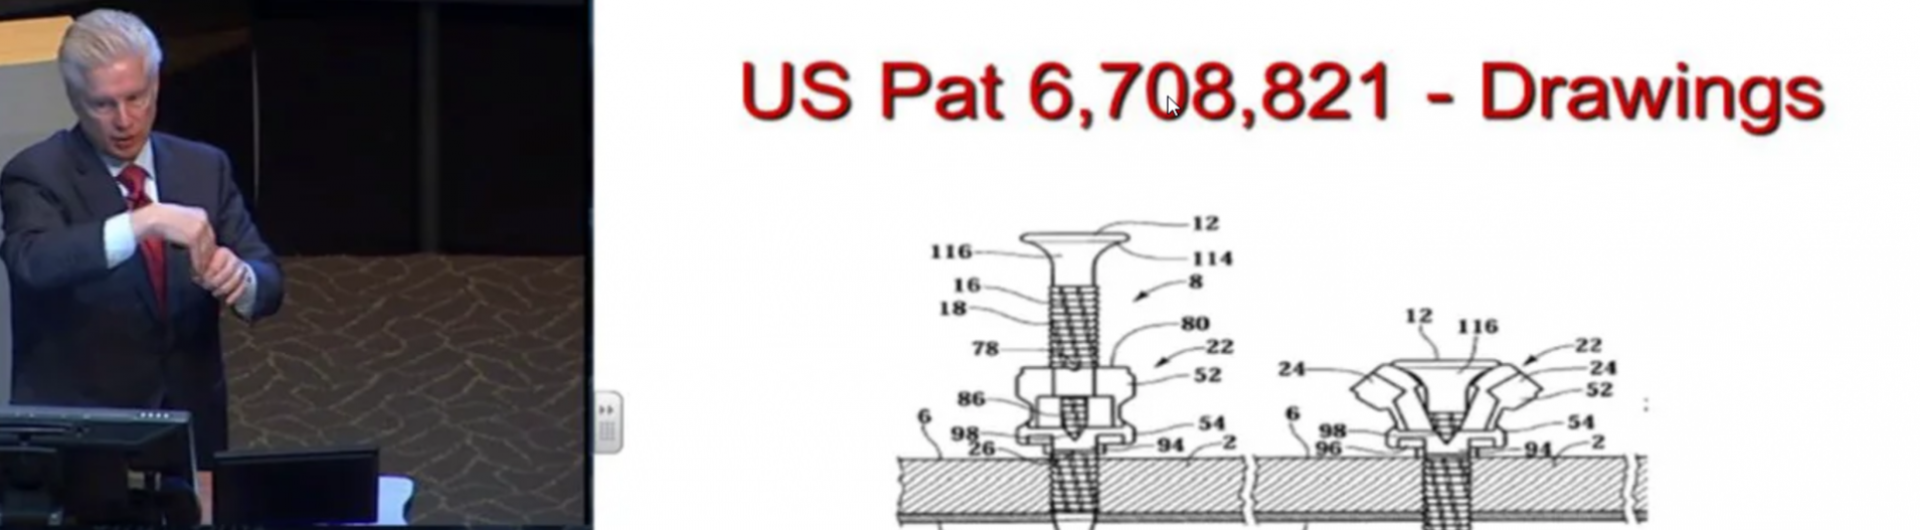 Patent Law image with engineering specs